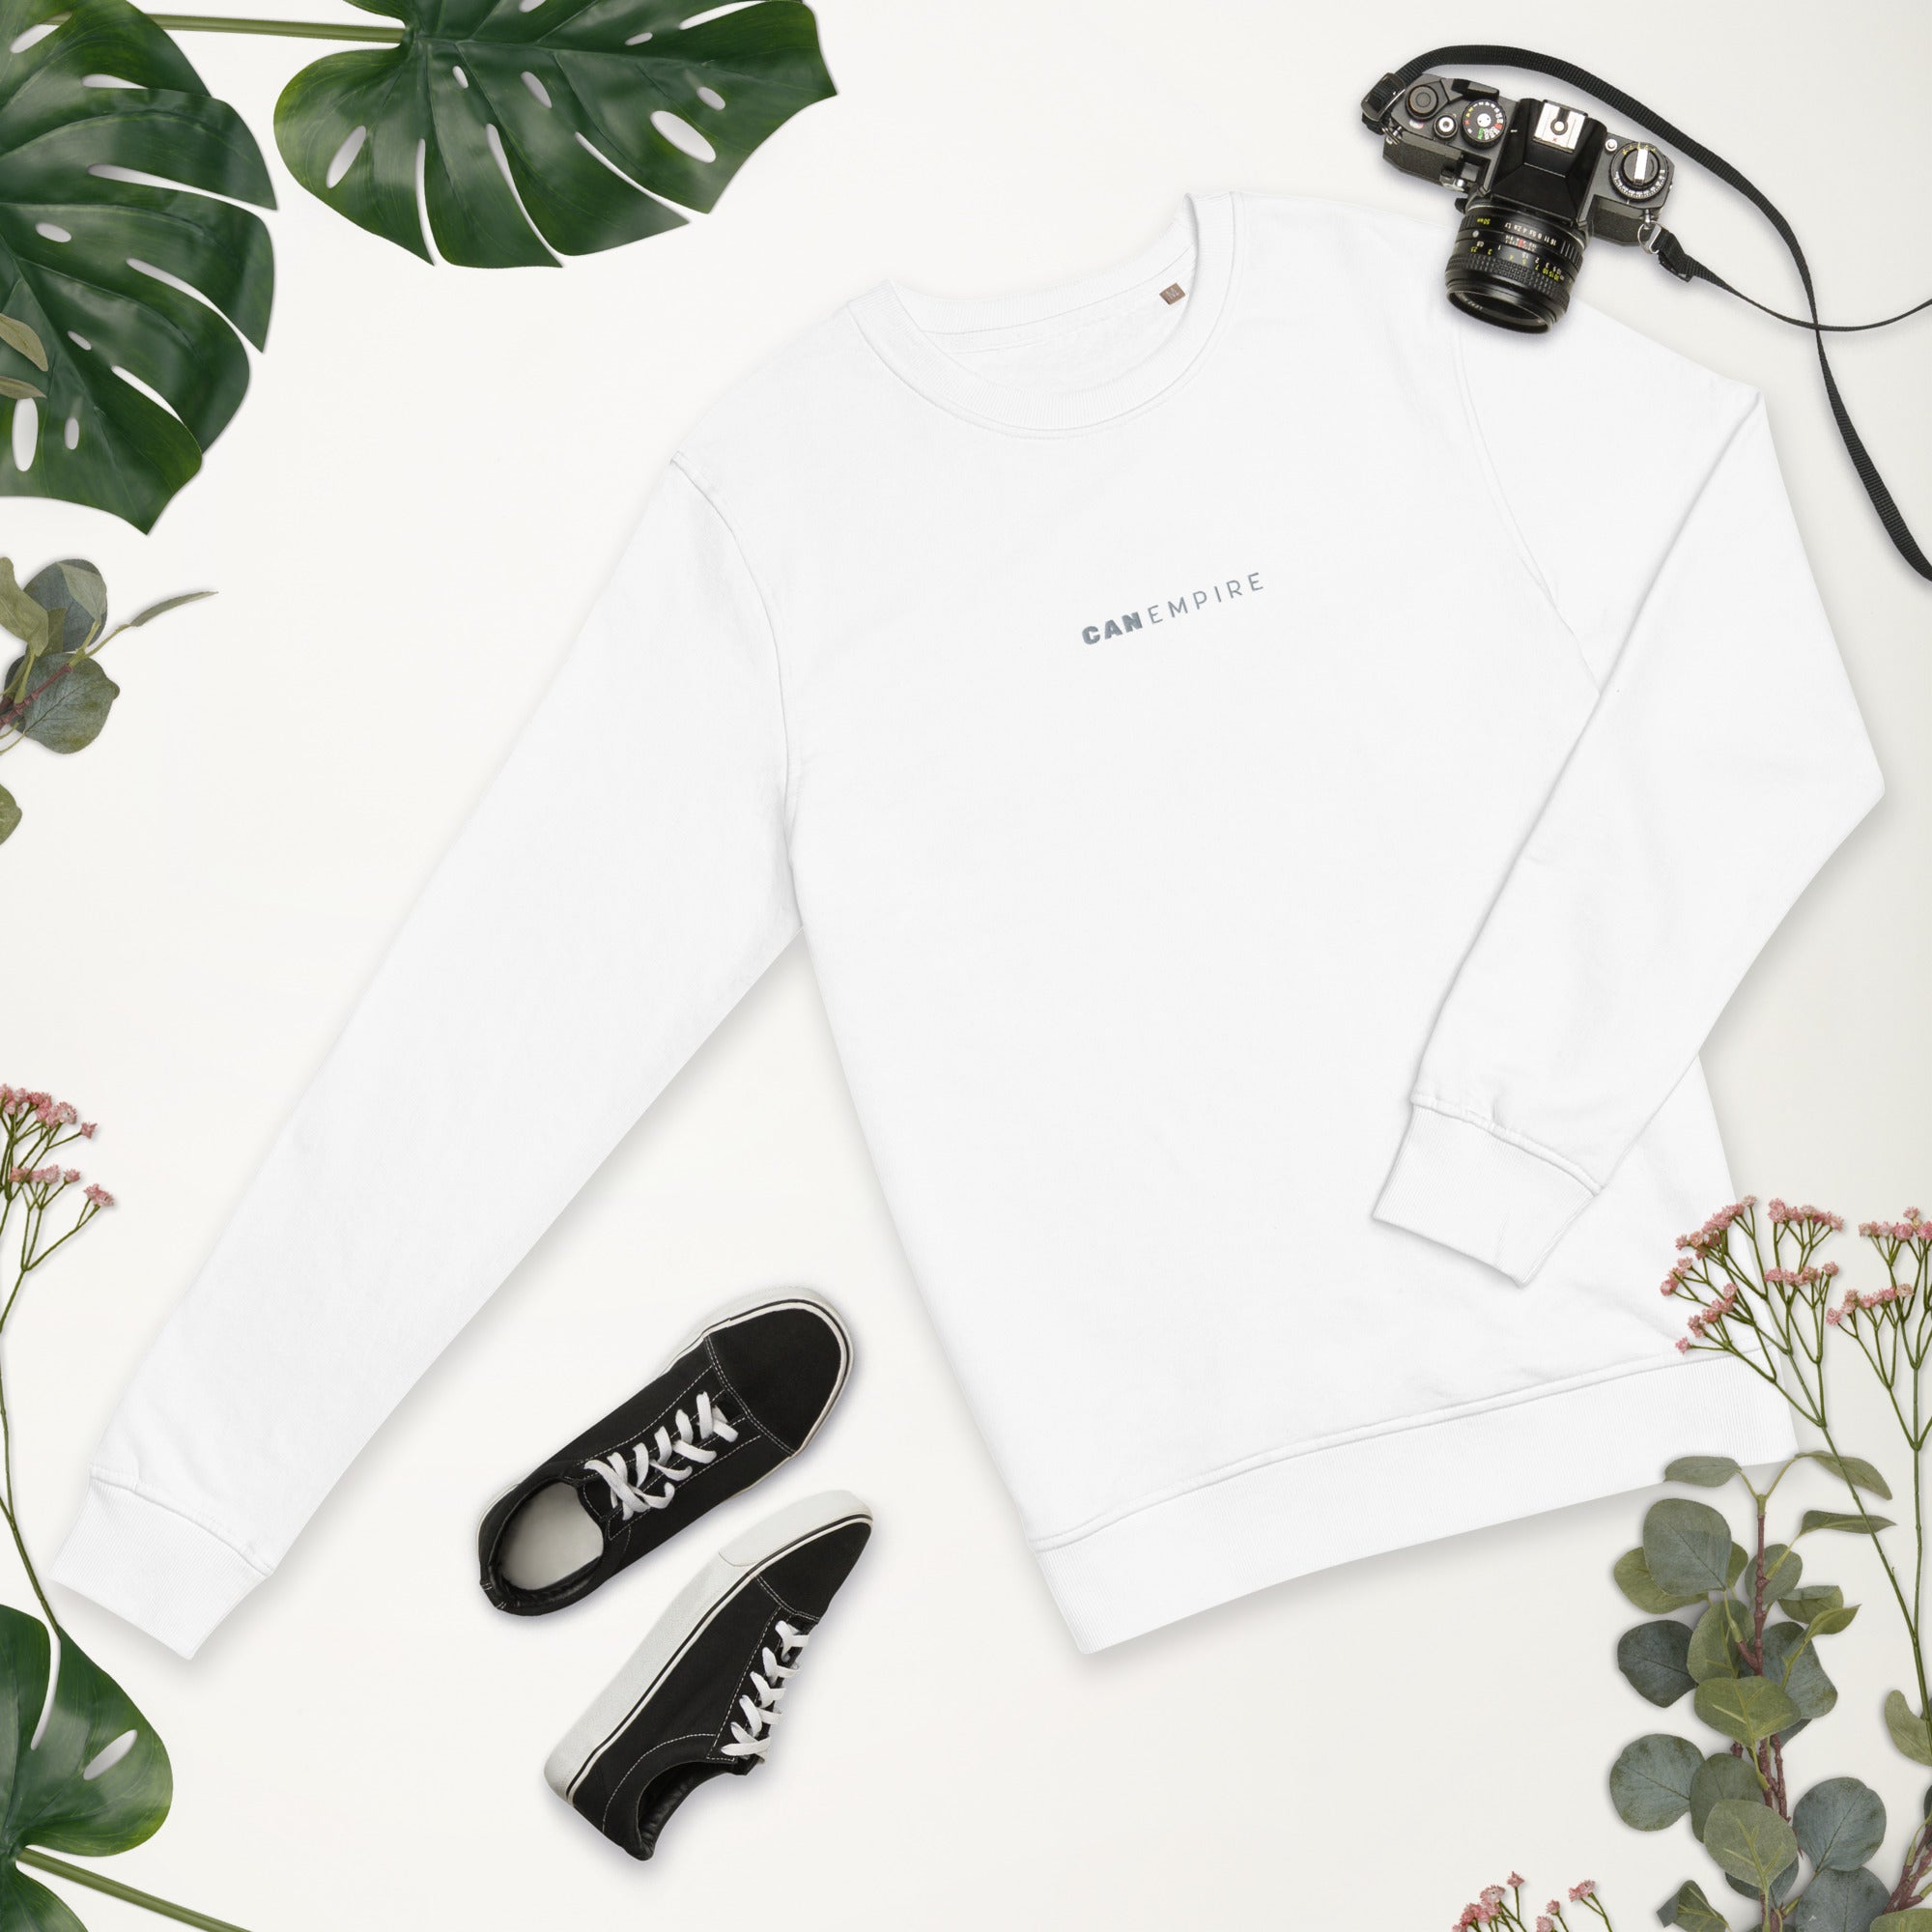 Image of the white sweatshirt from CanEmpire's official merch collection. This sweat features a small and classy logo of CanEmpire in the middle of the chest. Made of organic cotton and recycled polyester, this soft sweatshirt is ideal for cannabis enthusiasts and is available for purchase at www.canempire.ca .